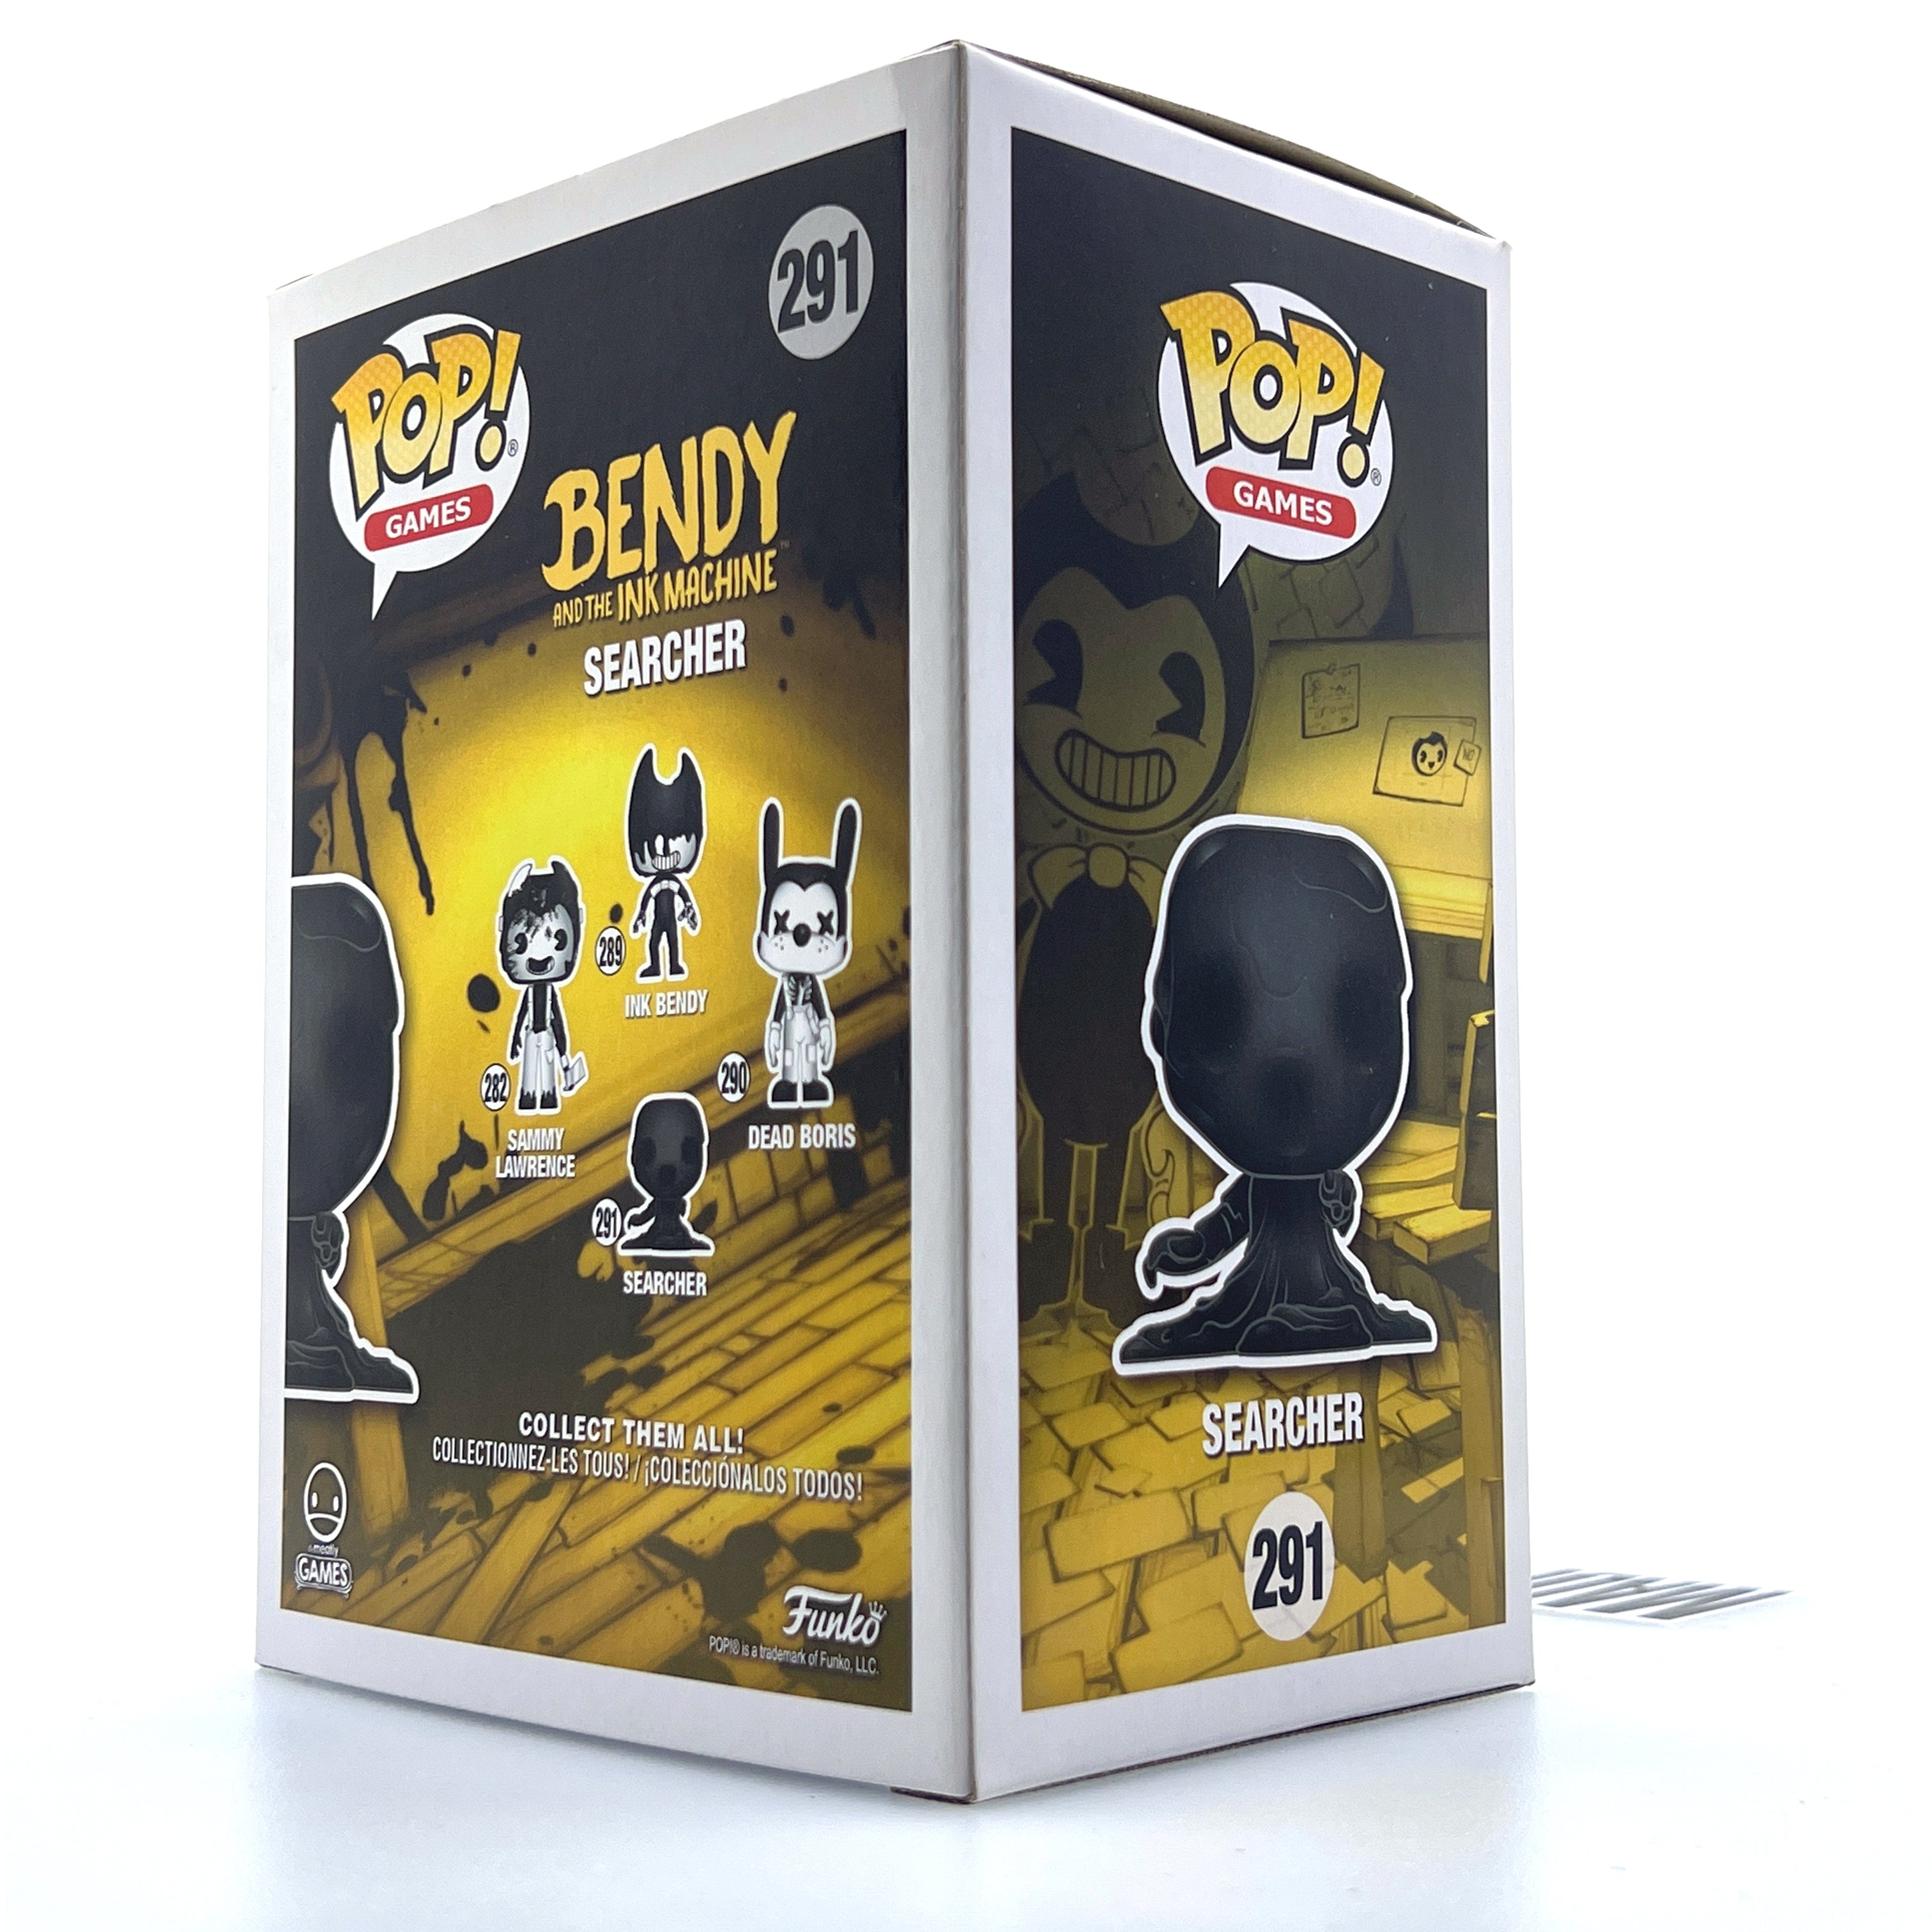 Funko Pop Games Bendy and the Ink Machine Searcher 291